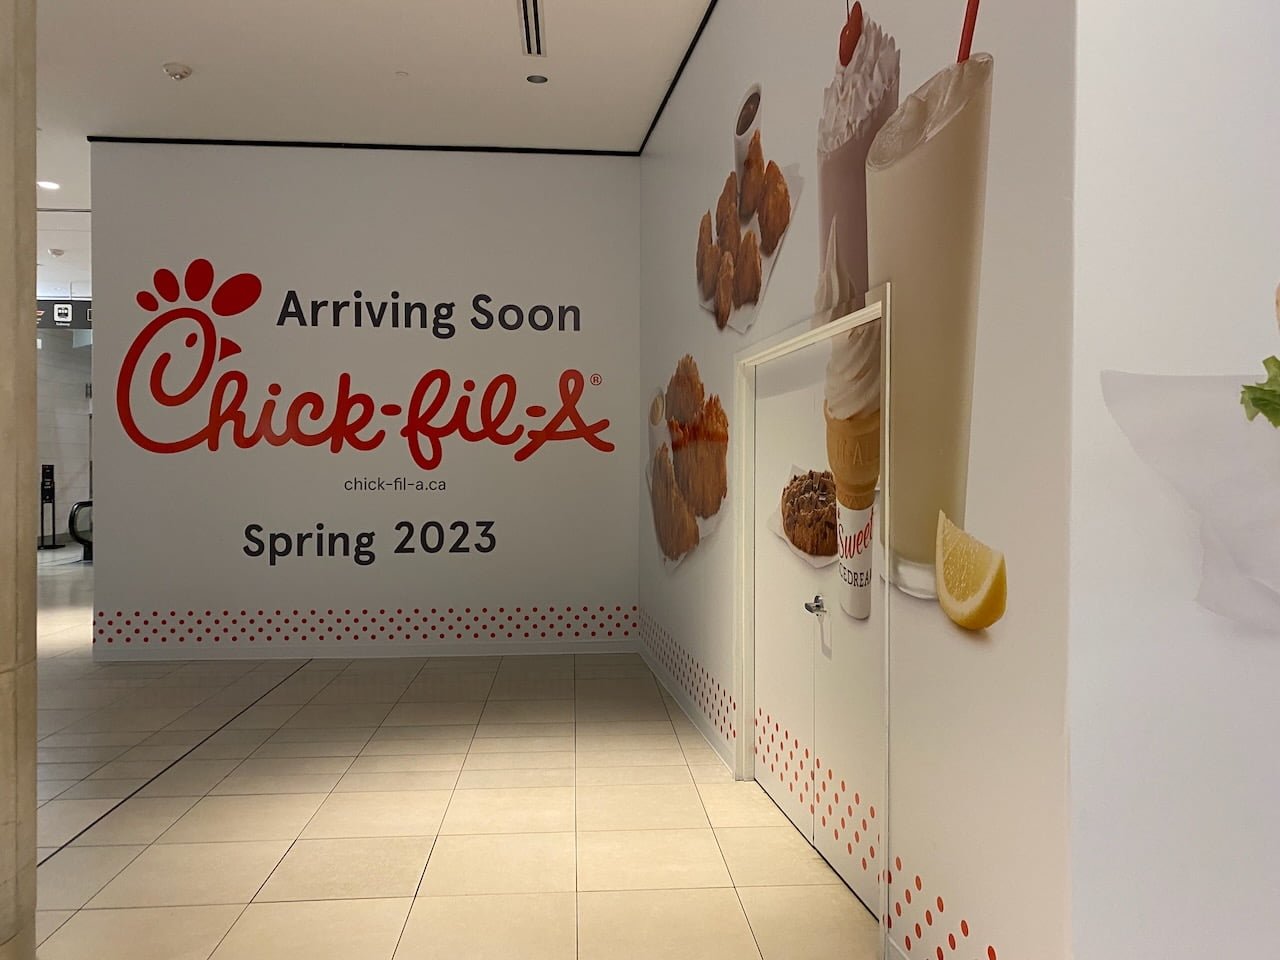 ChickfilA to Triple Canadian Footprint by 2025 with Planned Ongoing